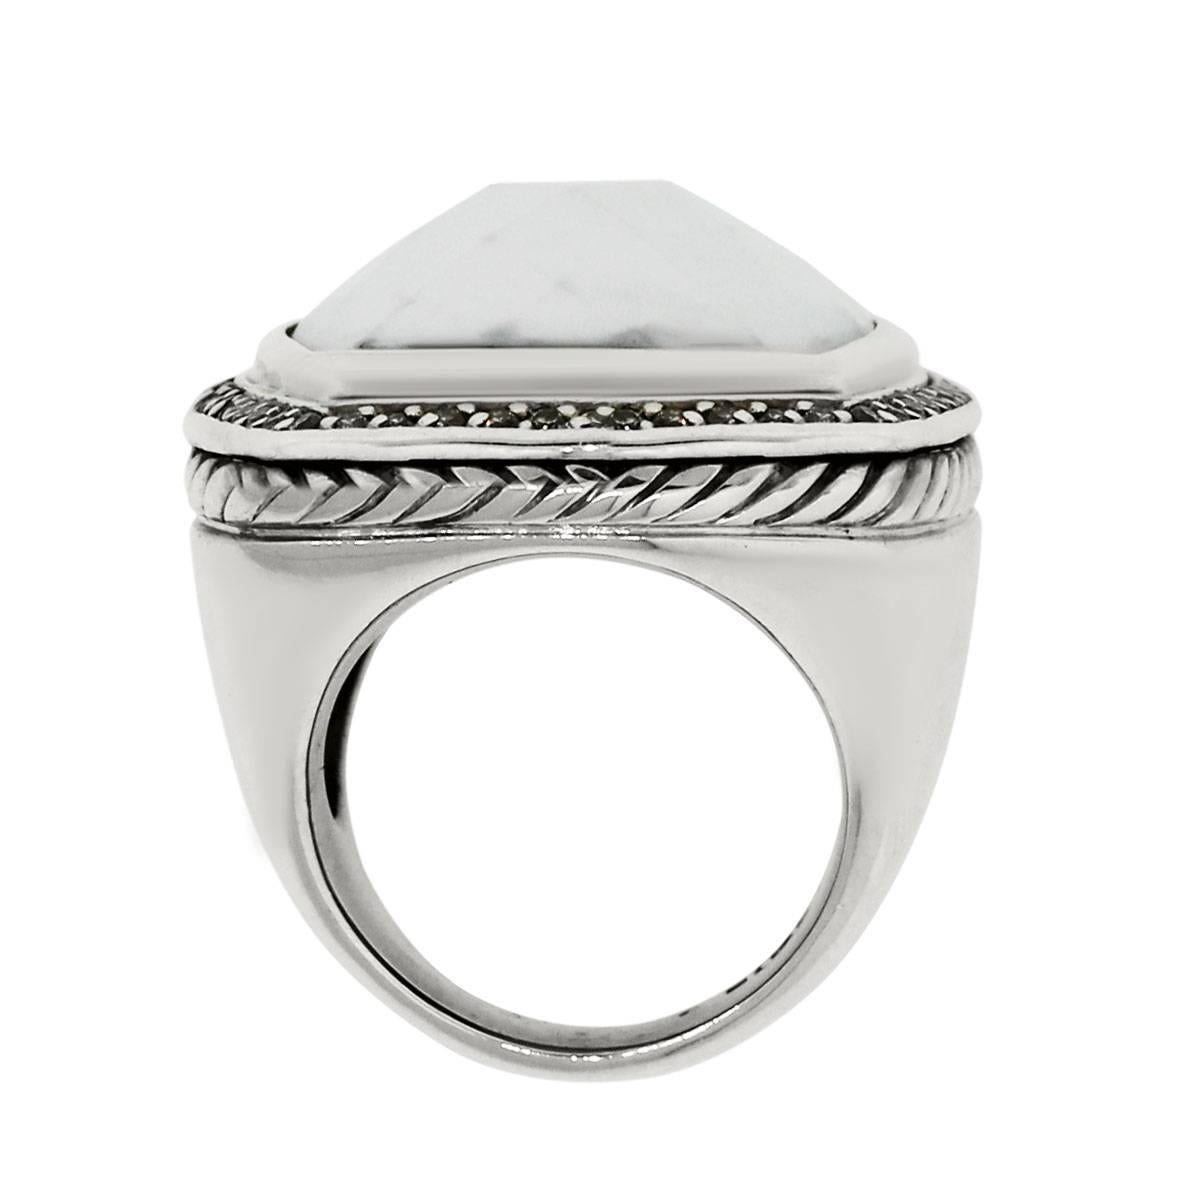 Designer: David Yurman
Material: Sterling silver
Diamond Details: Approximately o.26ctw of round brilliant diamonds.
Gemstone Details: 20mm x 20mm white agate
Size: 6 (can be sized)
Total Weight: 33.8g (14dwt)
Measurements: 1.18″ x 0.87″ x